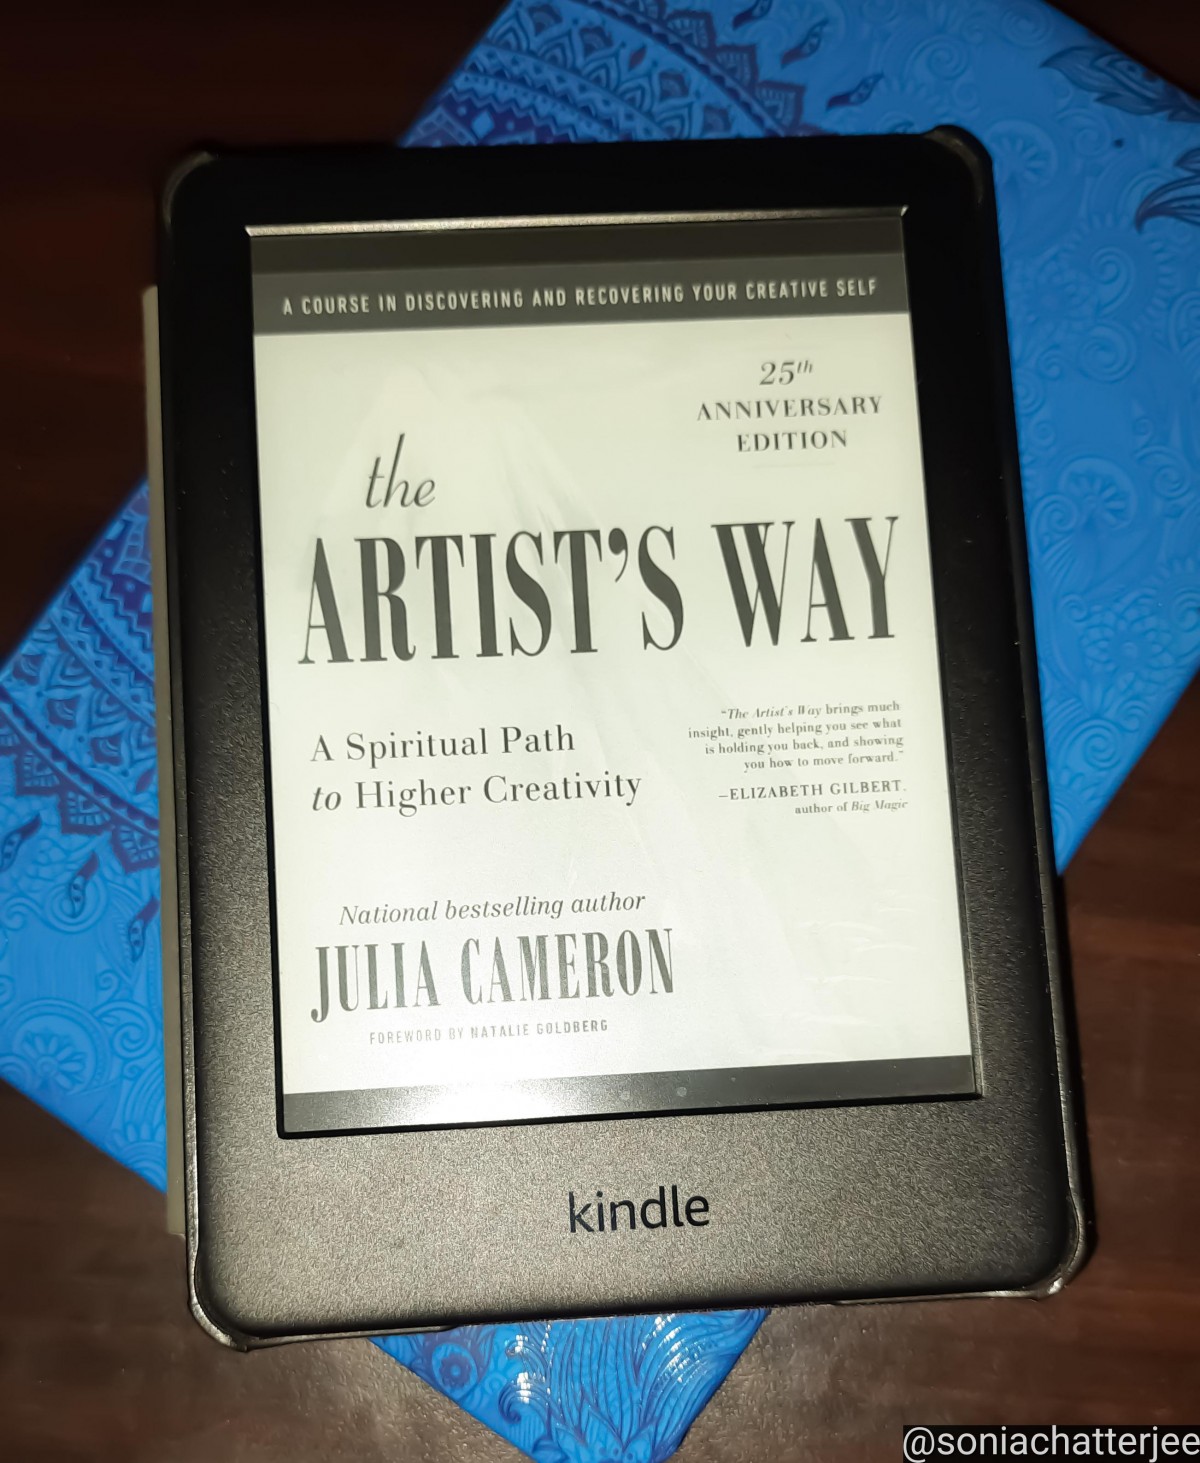 The Artists Way by Julia Cameron